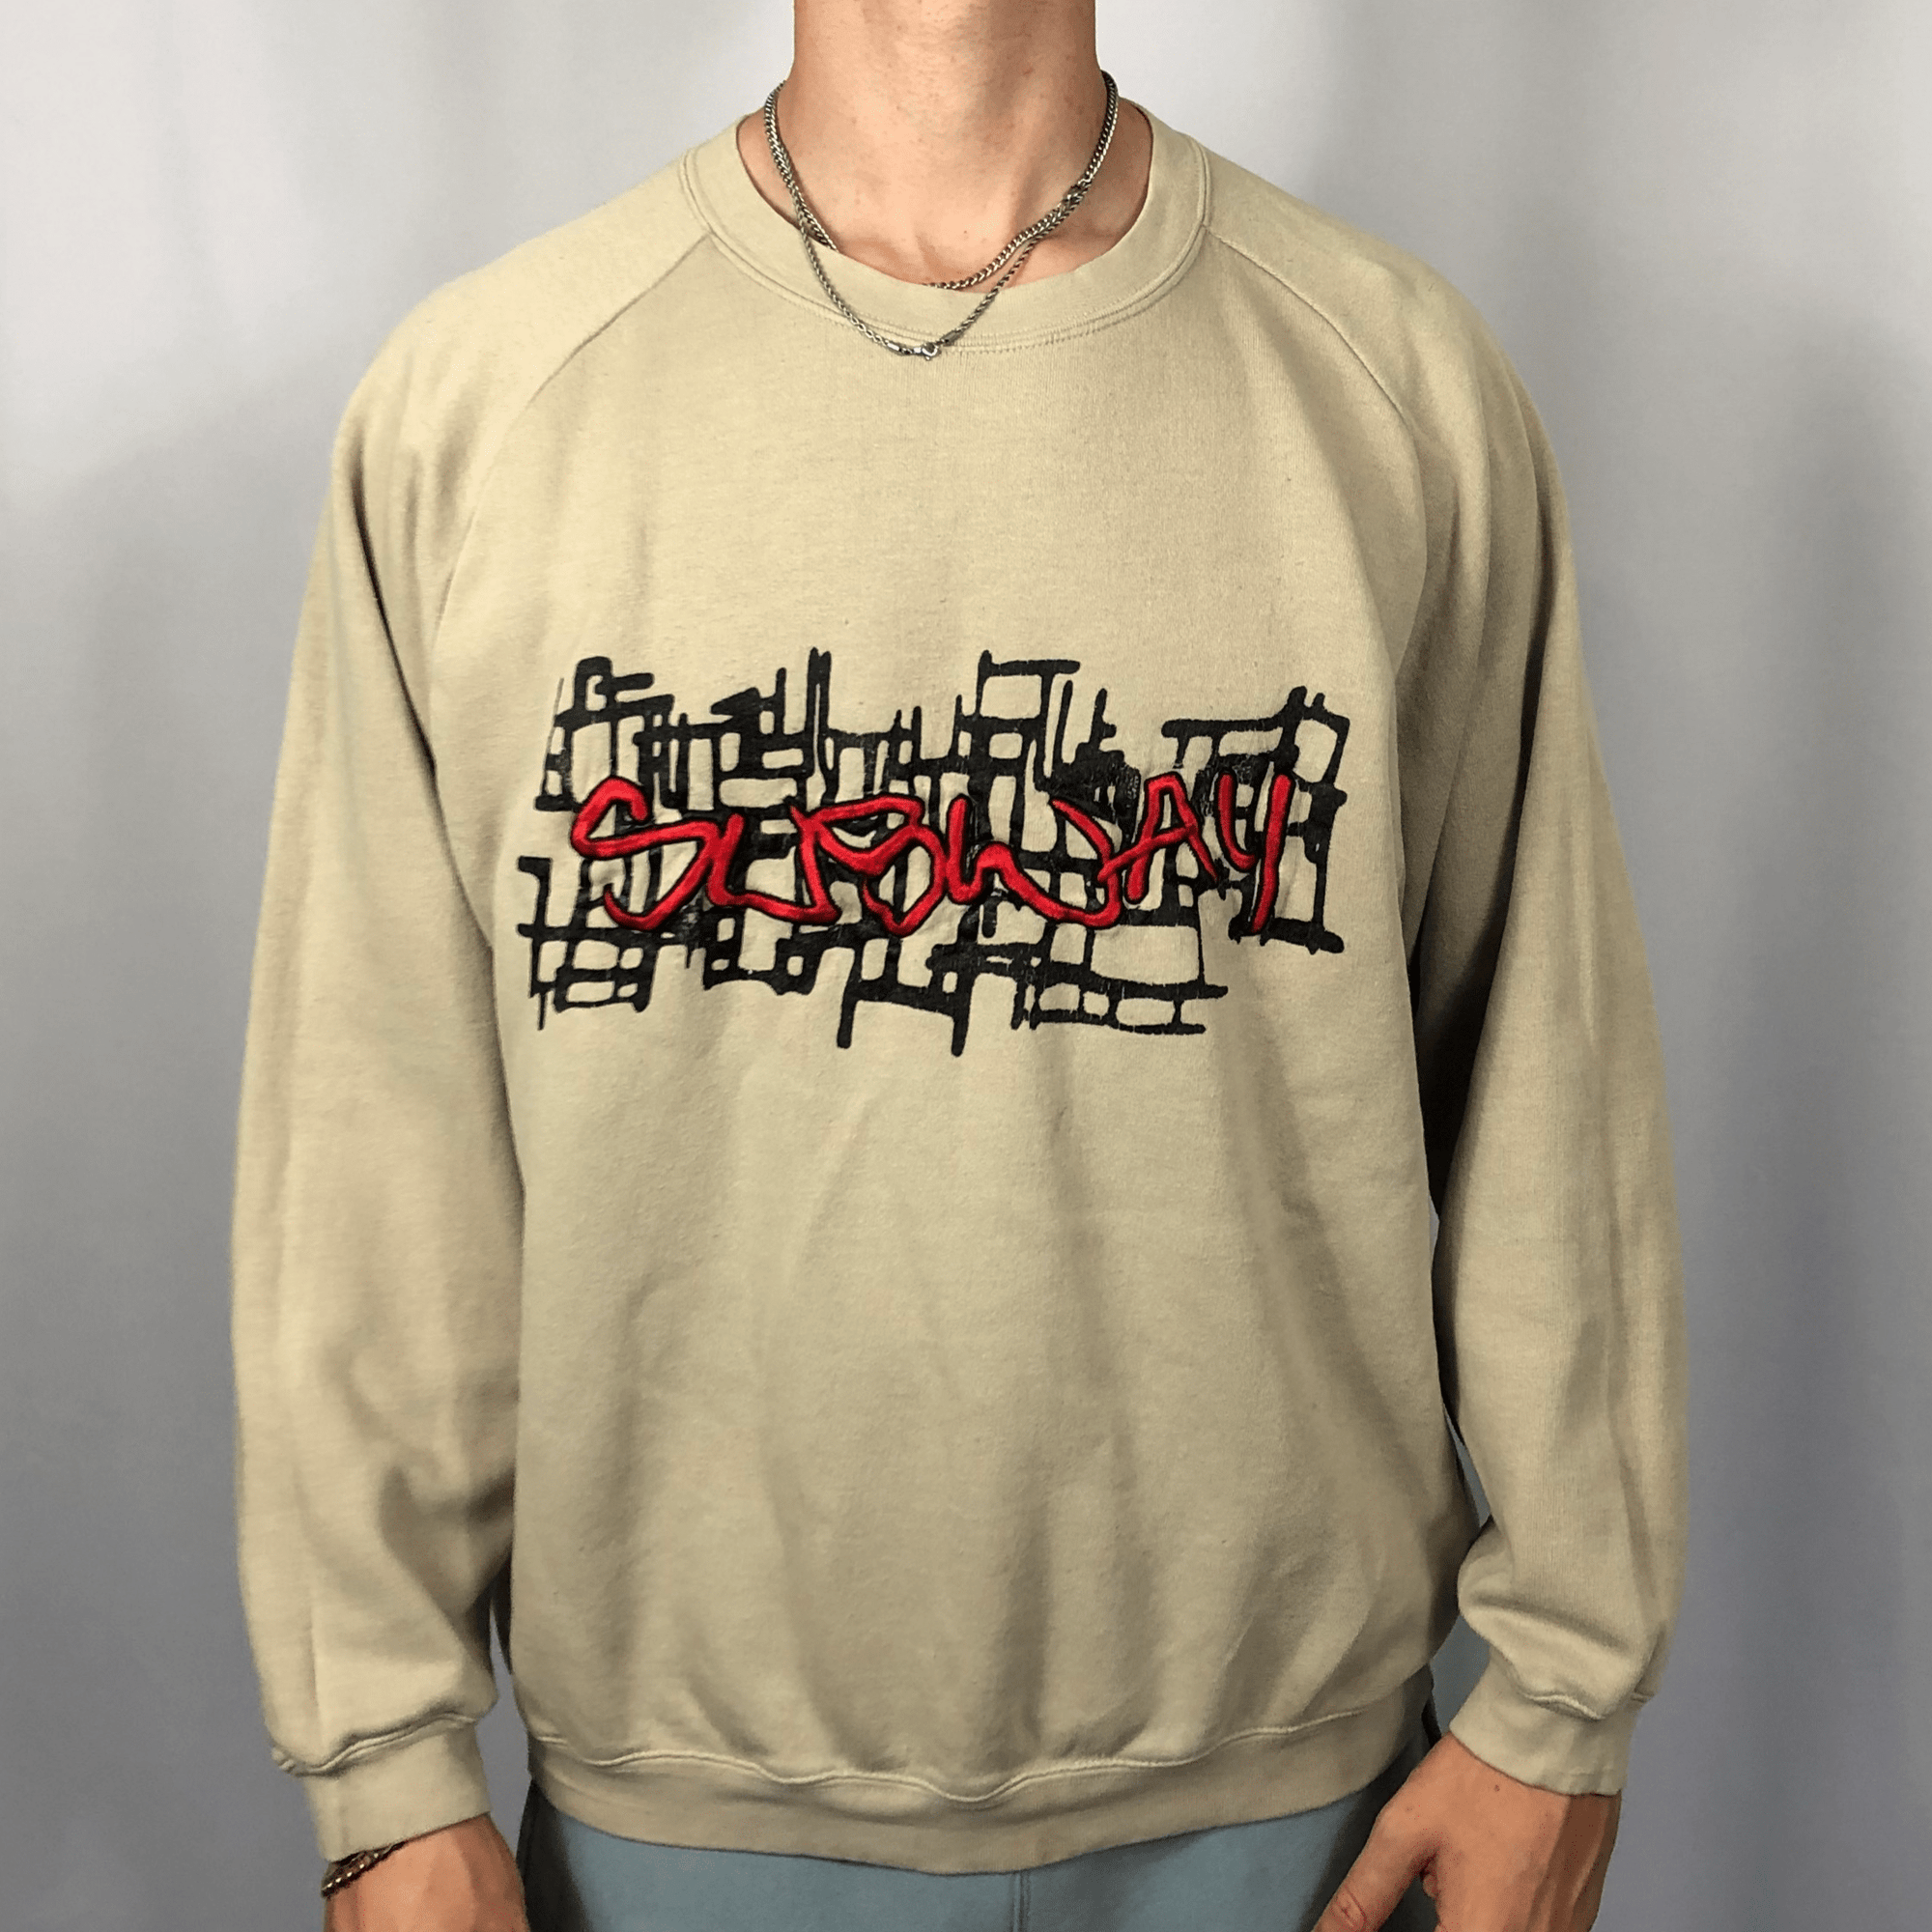 Vintage Sweatshirt with Embroidered Graffiti Spellout - Medium - Vintique Clothing